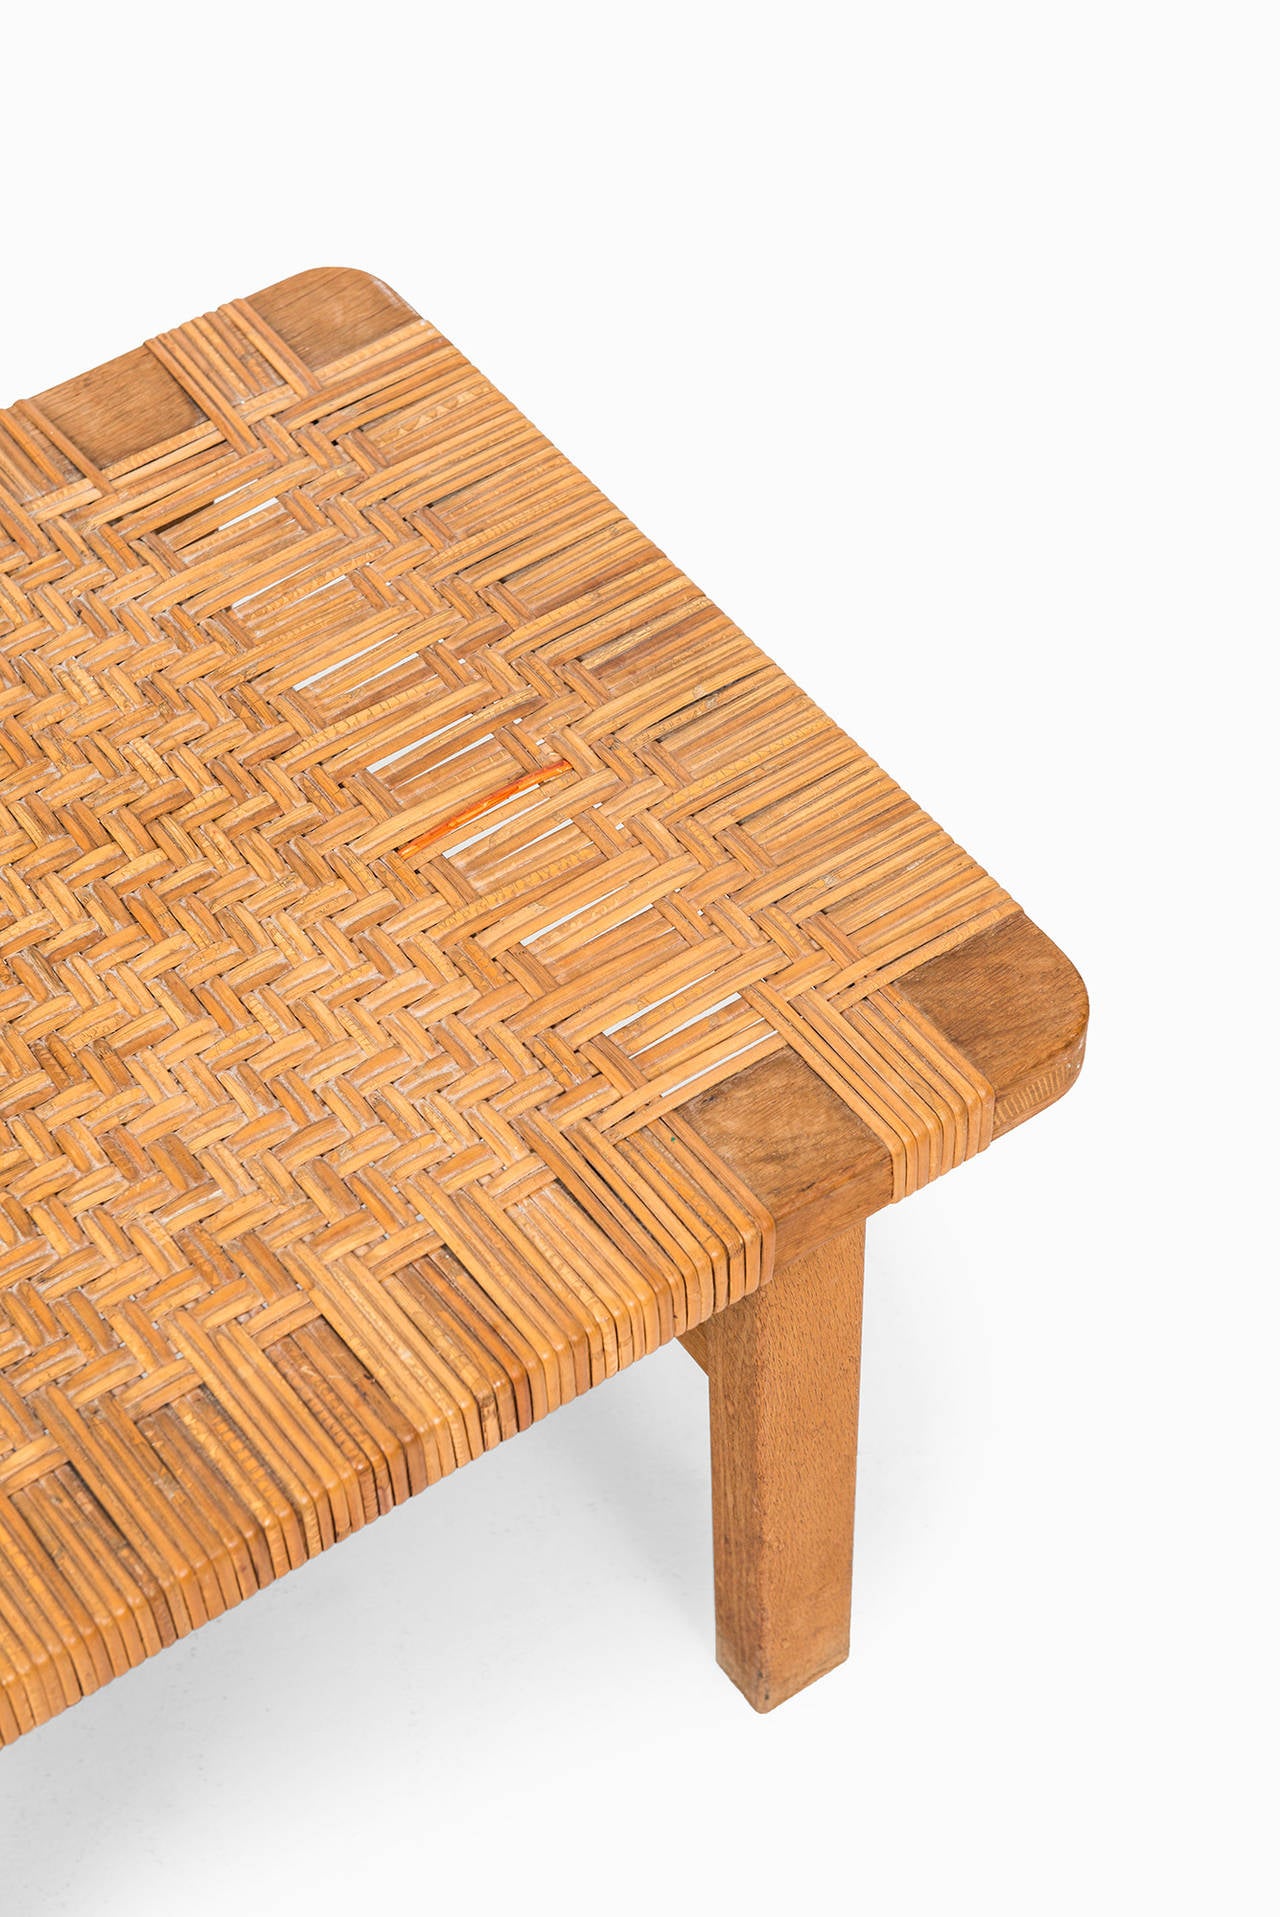 Mid-Century Modern Børge Mogensen Side Tables in Woven Cane by Fredericia in Denmark